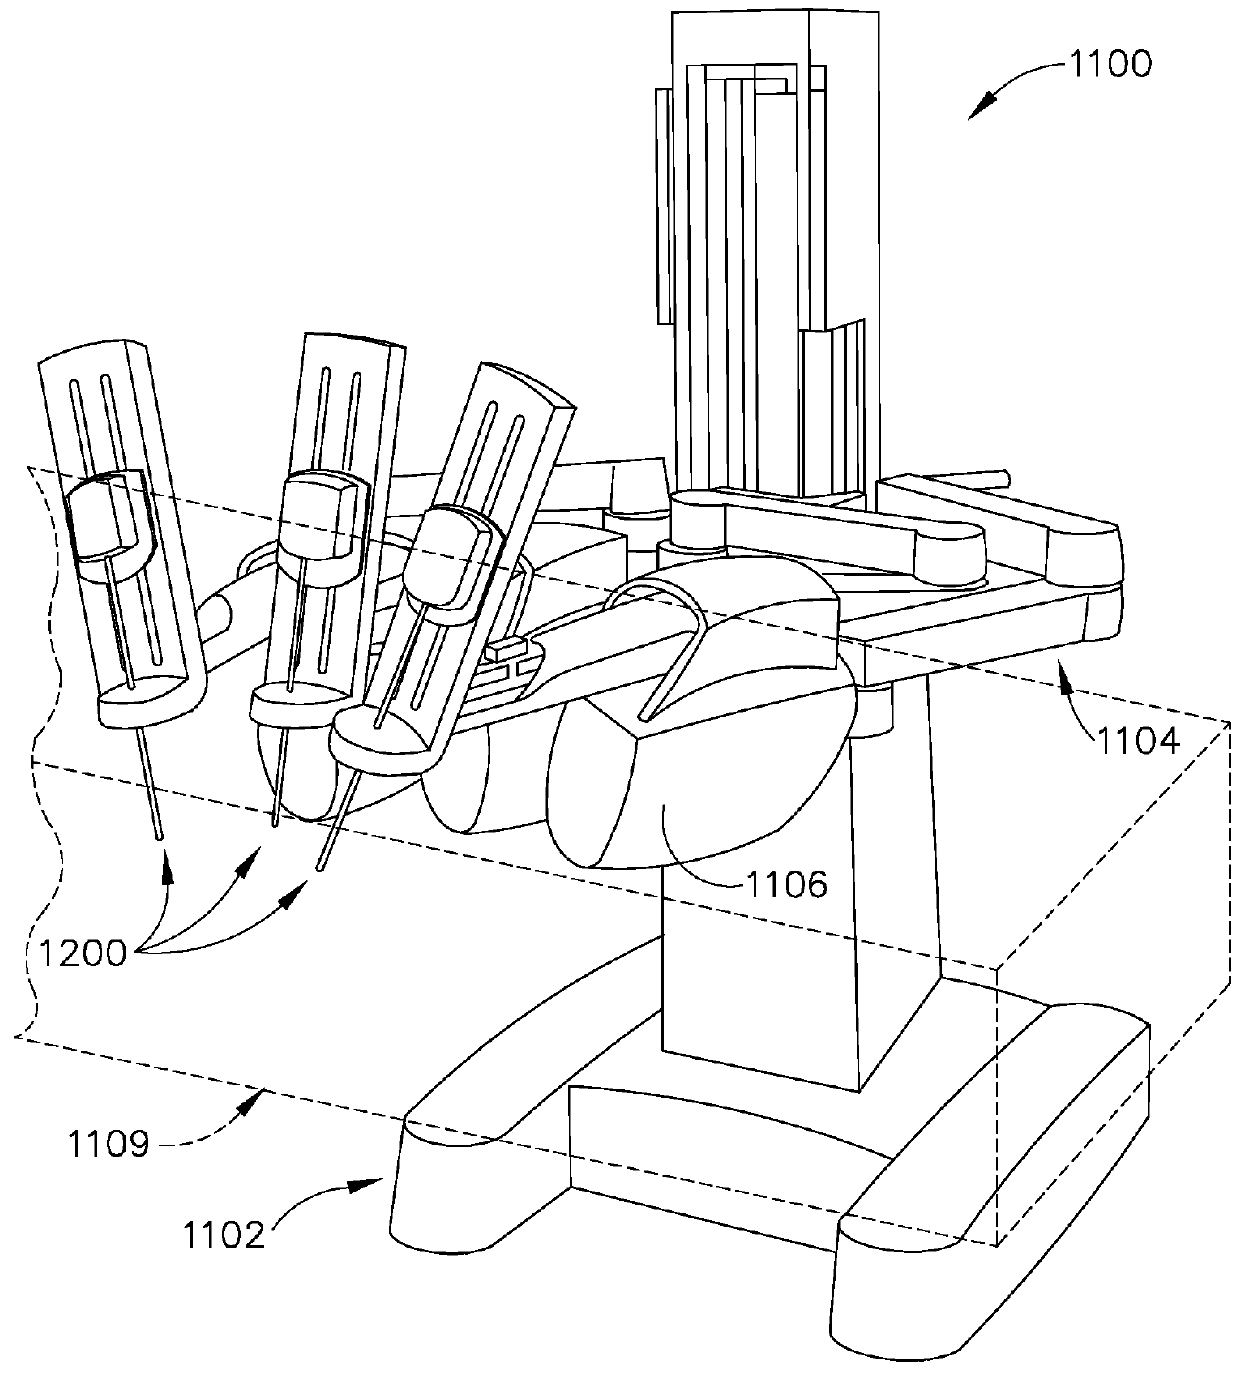 Surgical stapling instruments with rotatable staple deployment arrangements